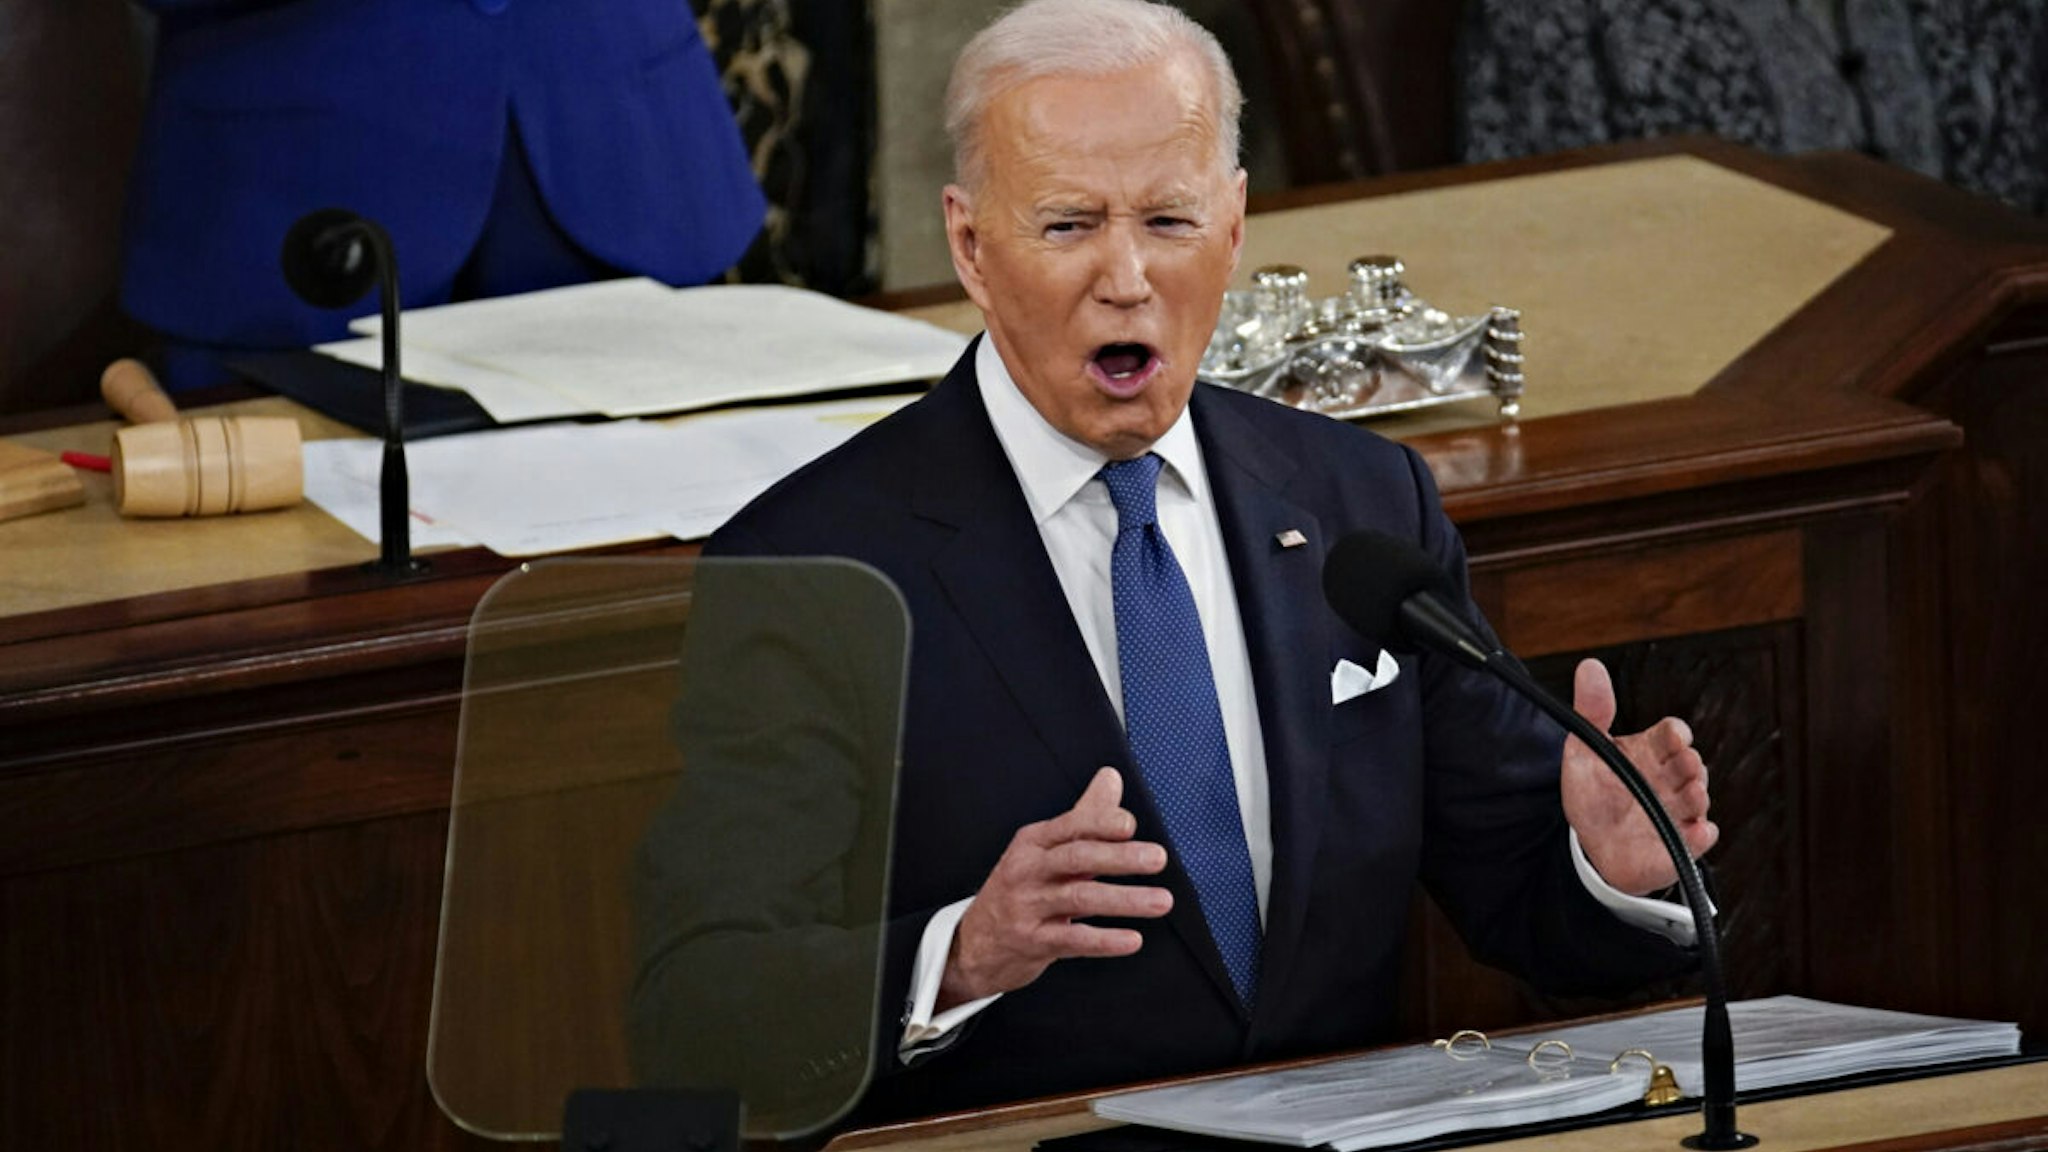 U.S. President Joe Biden delivers the State of the Union address during a joint session of Congress in the U.S. Capitol’s House Chamber on March 01, 2022 in Washington, DC.